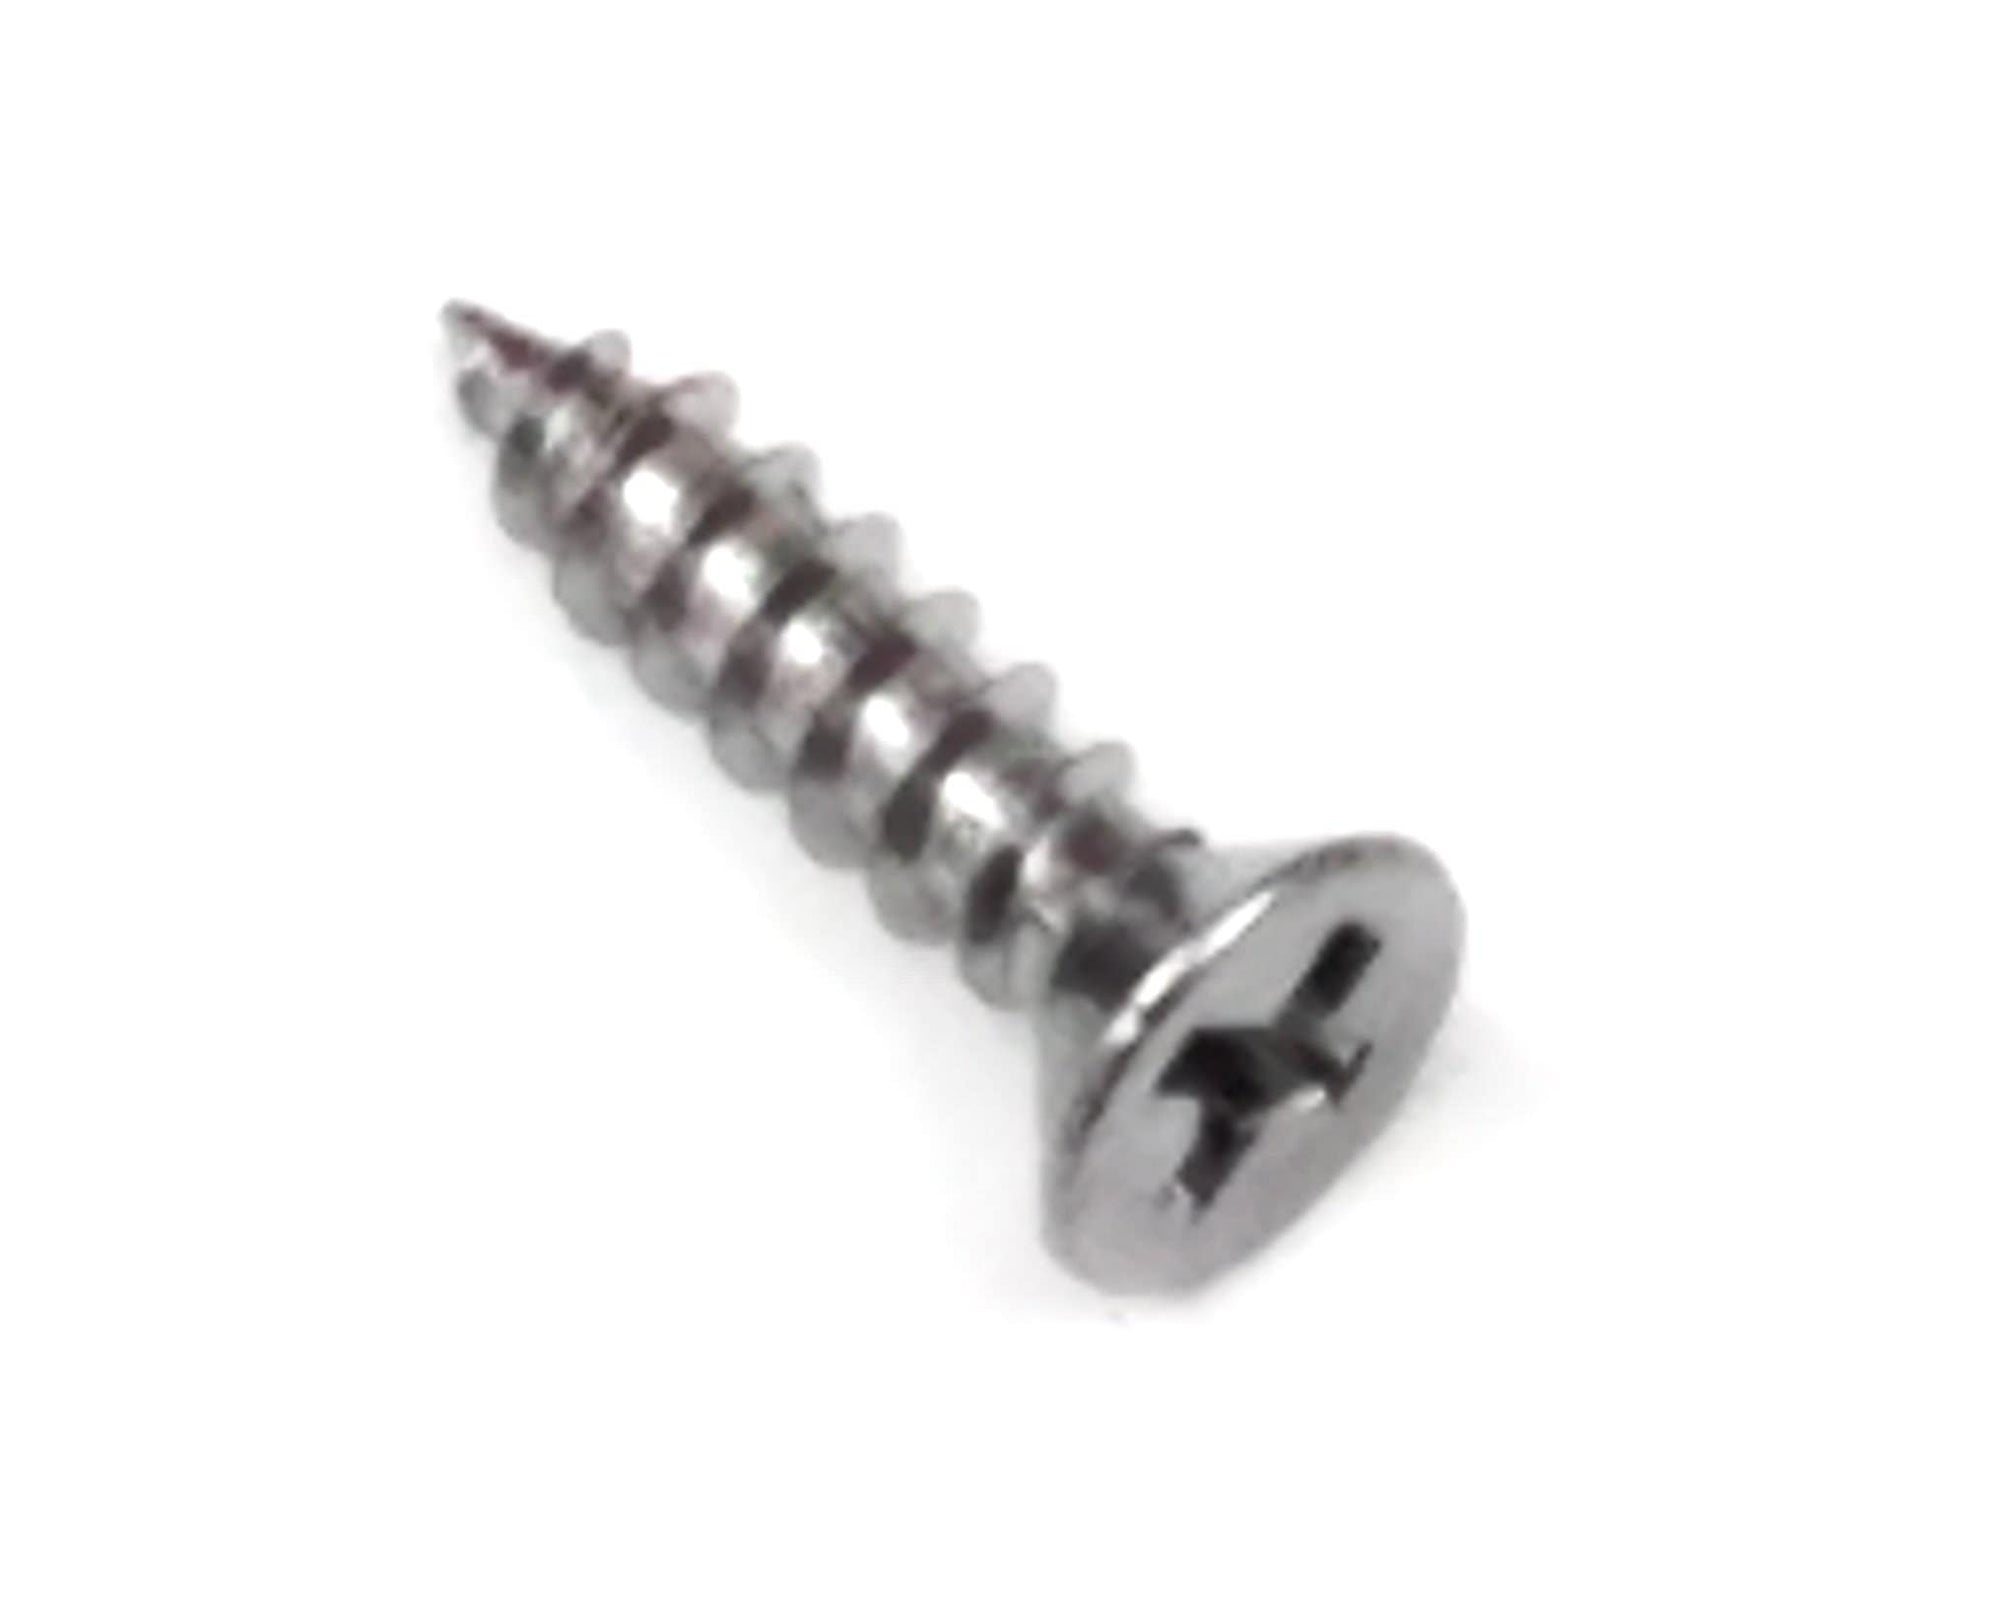 Fly Cut Wood Screws For Door Hinges - Polished Chrome - #9 X 3/4" Inch